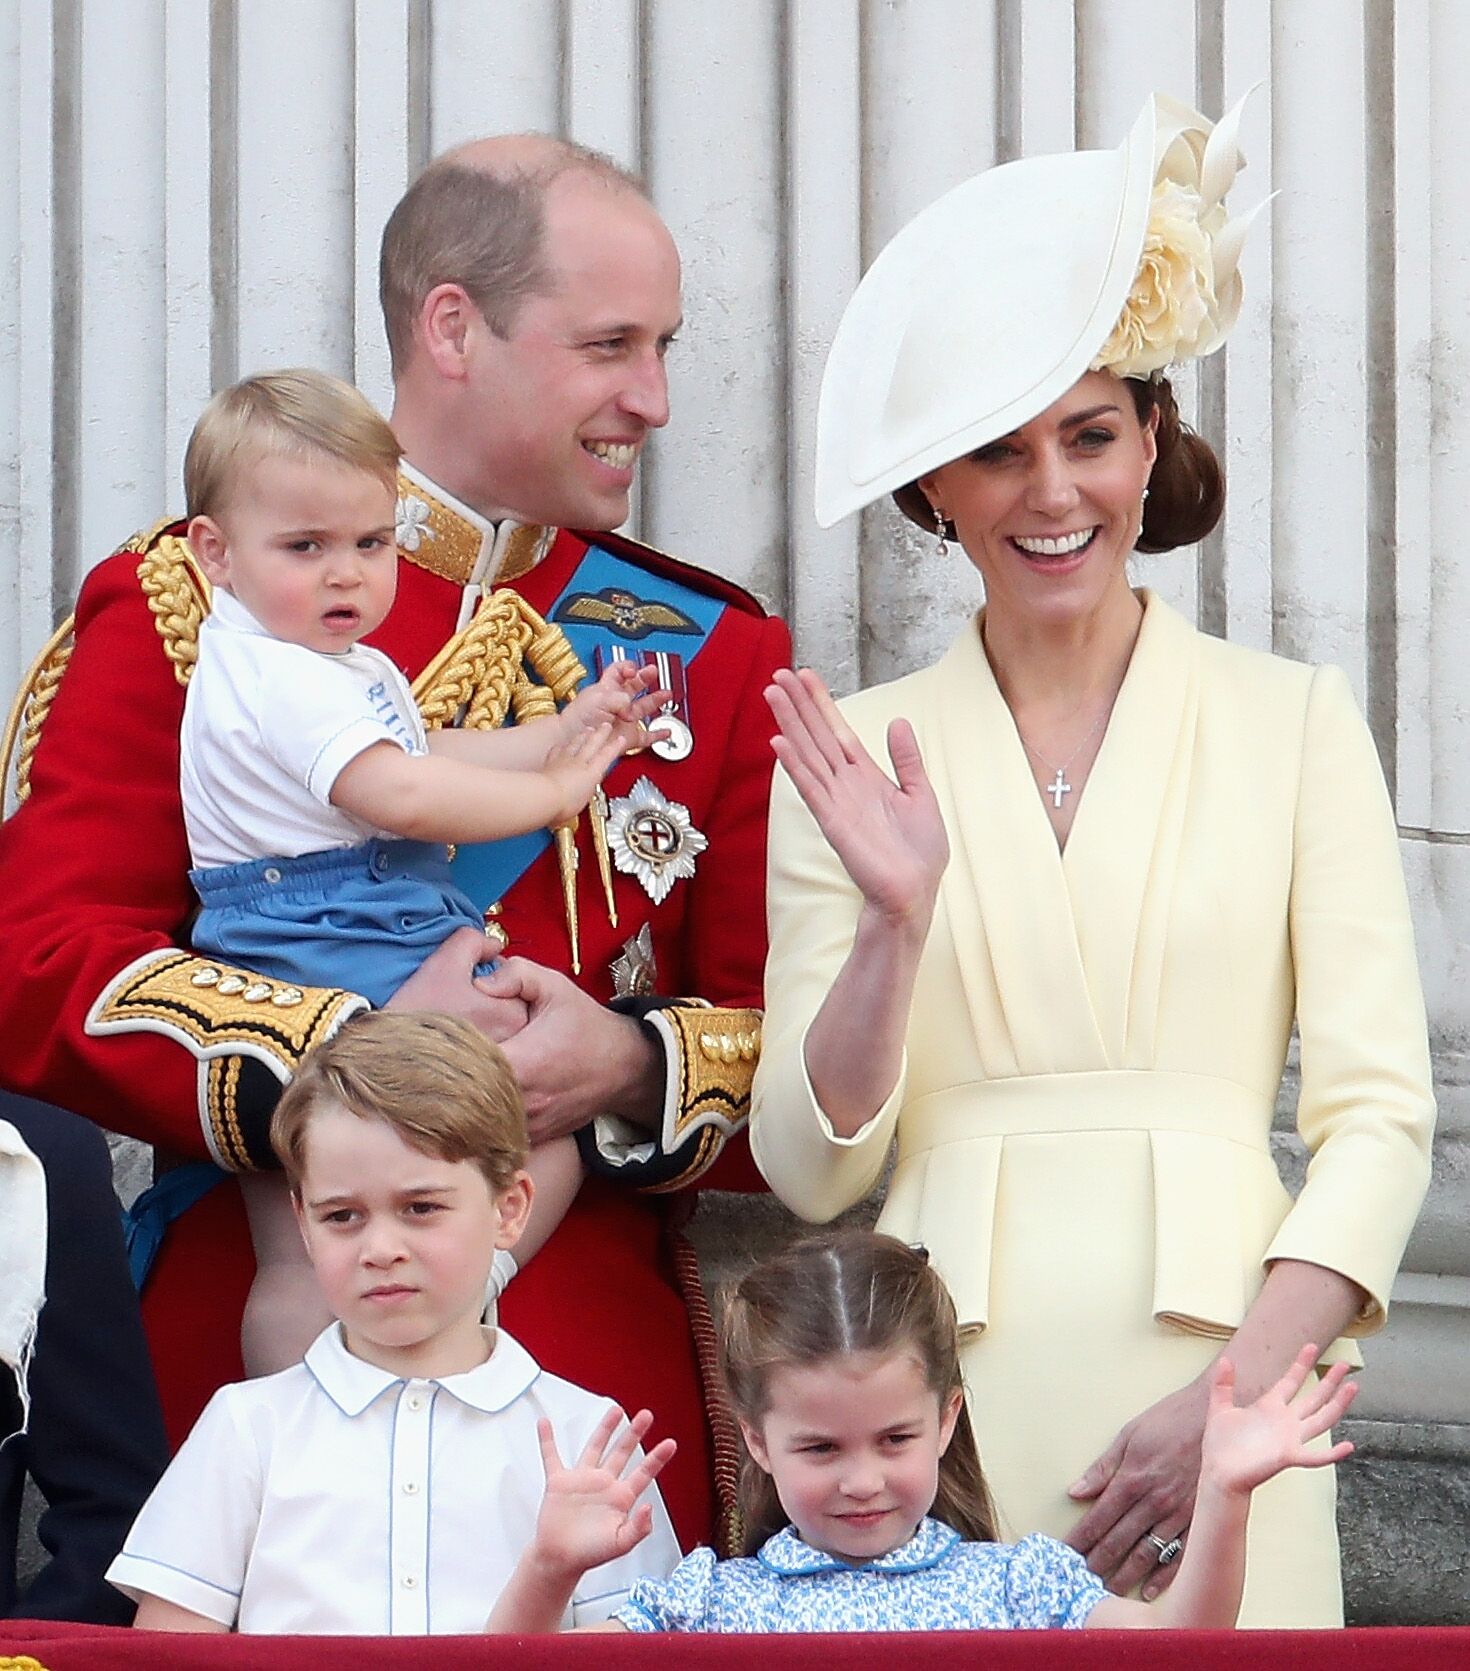 Prince William, Duke of Cambridge, Catherine, Duchess of Cambridge, Prince Louis of Cambridge, Prince George of Cambridge and Princess Charlotte of Cambridge during Trooping The Colour, the Queen's annual birthday parade, in London, England | Photo: Getty Images